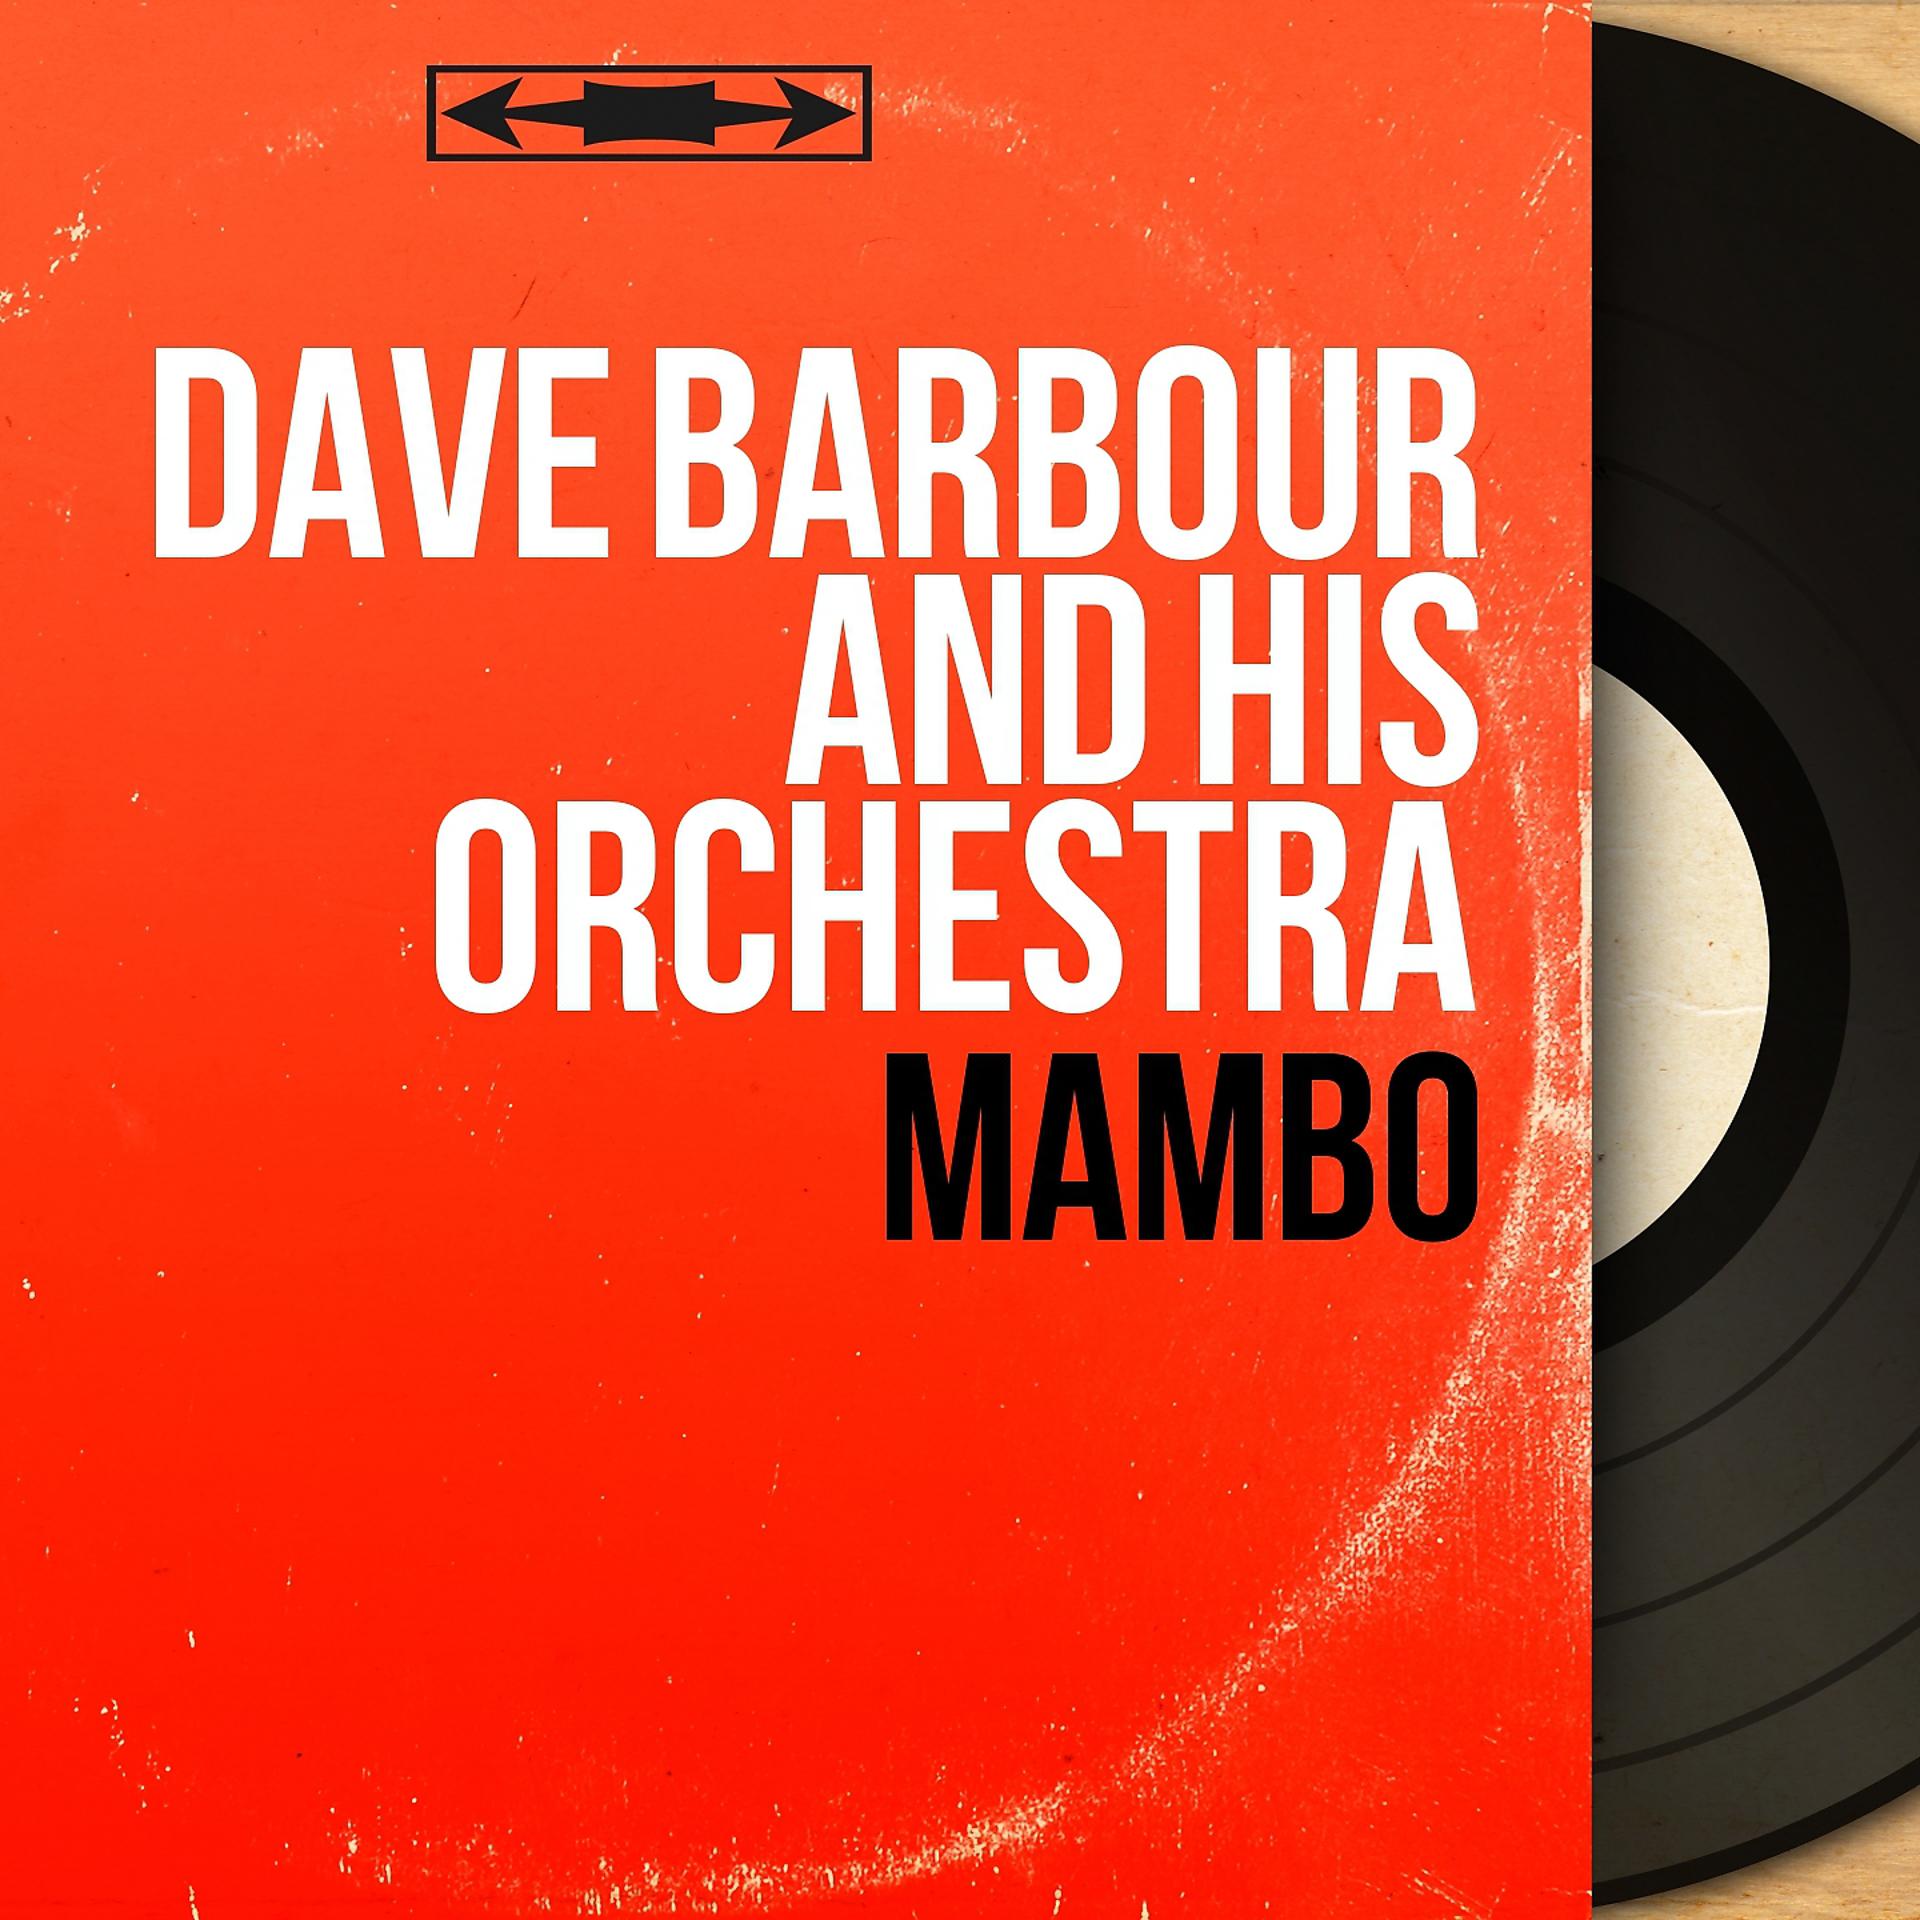 Постер к треку Dave Barbour And His Orchestra - Guitar Mambo